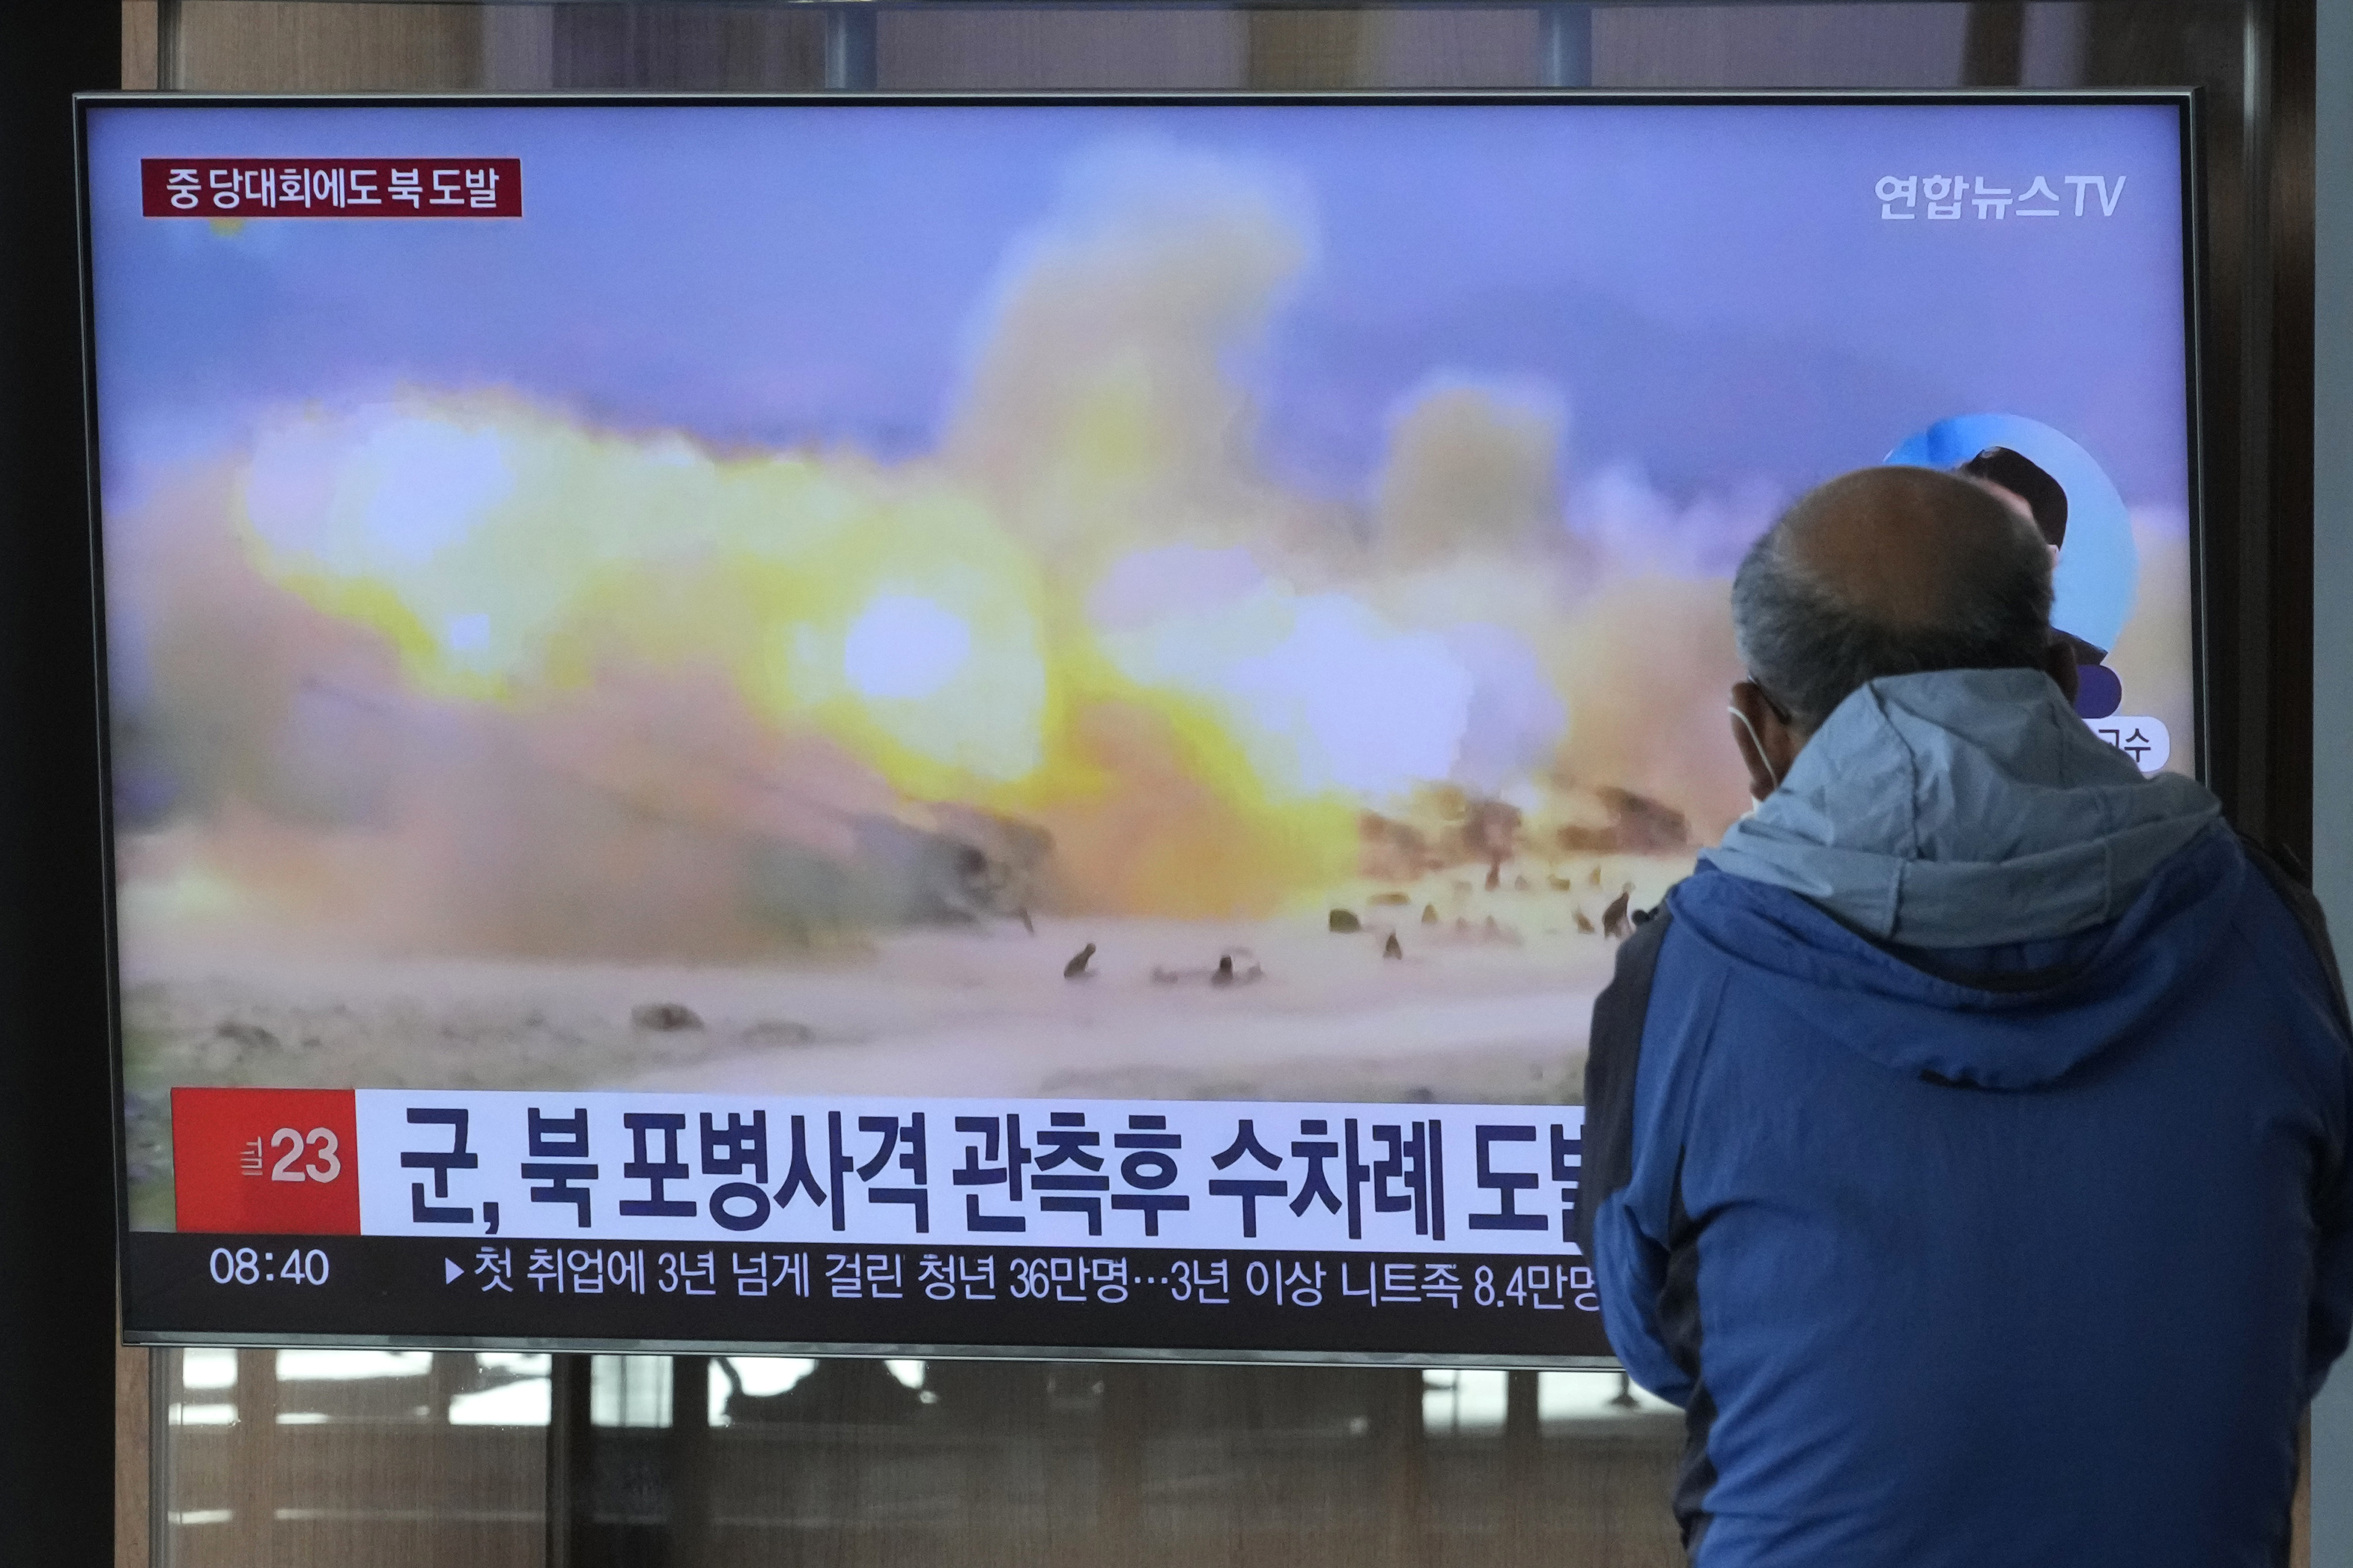 A TV screen shows a file image of North Korea’s military exercise during a news program at the Seoul Railway Station on October 19, 2022. South Korea’s military said North Korea fired about 130 suspected artillery rounds on Monday into the water near their western and eastern sea borders, the latest military action contributing to worsening relations between the neighbours. Photo: AP